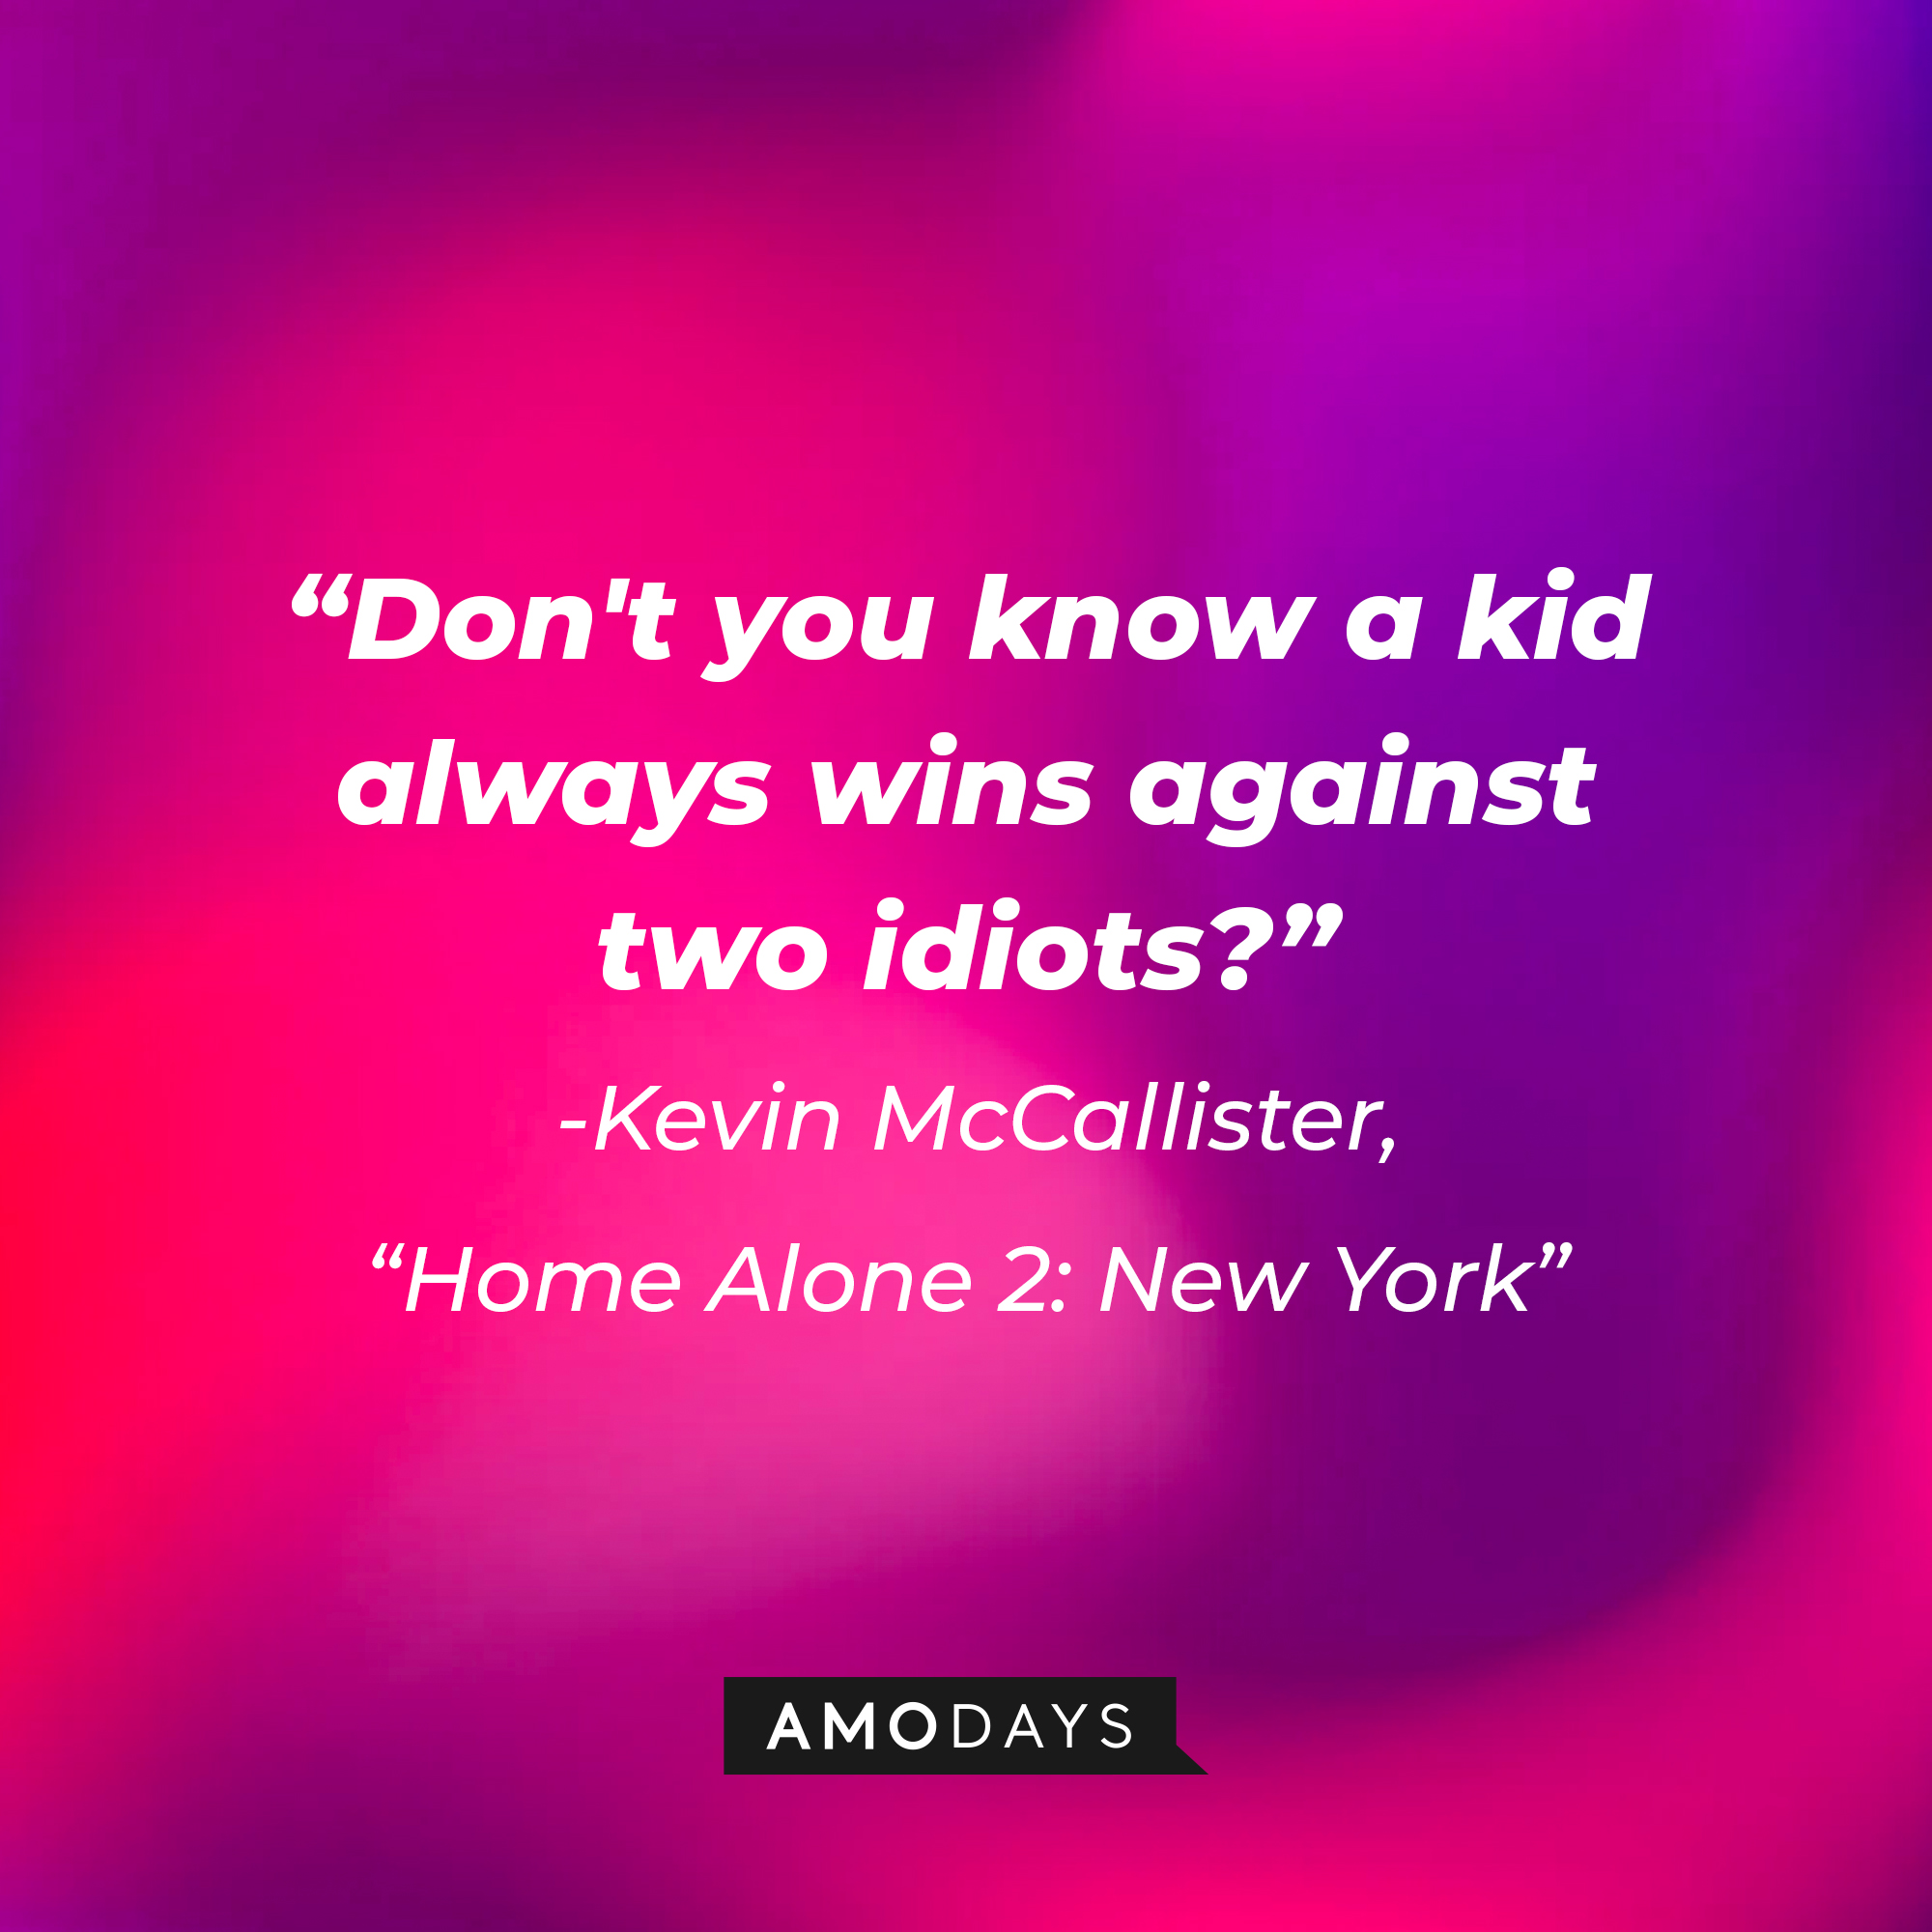 Kevin McCallister's quote: "Don't you know a kid always wins against two idiots?" | Source: AmoDays